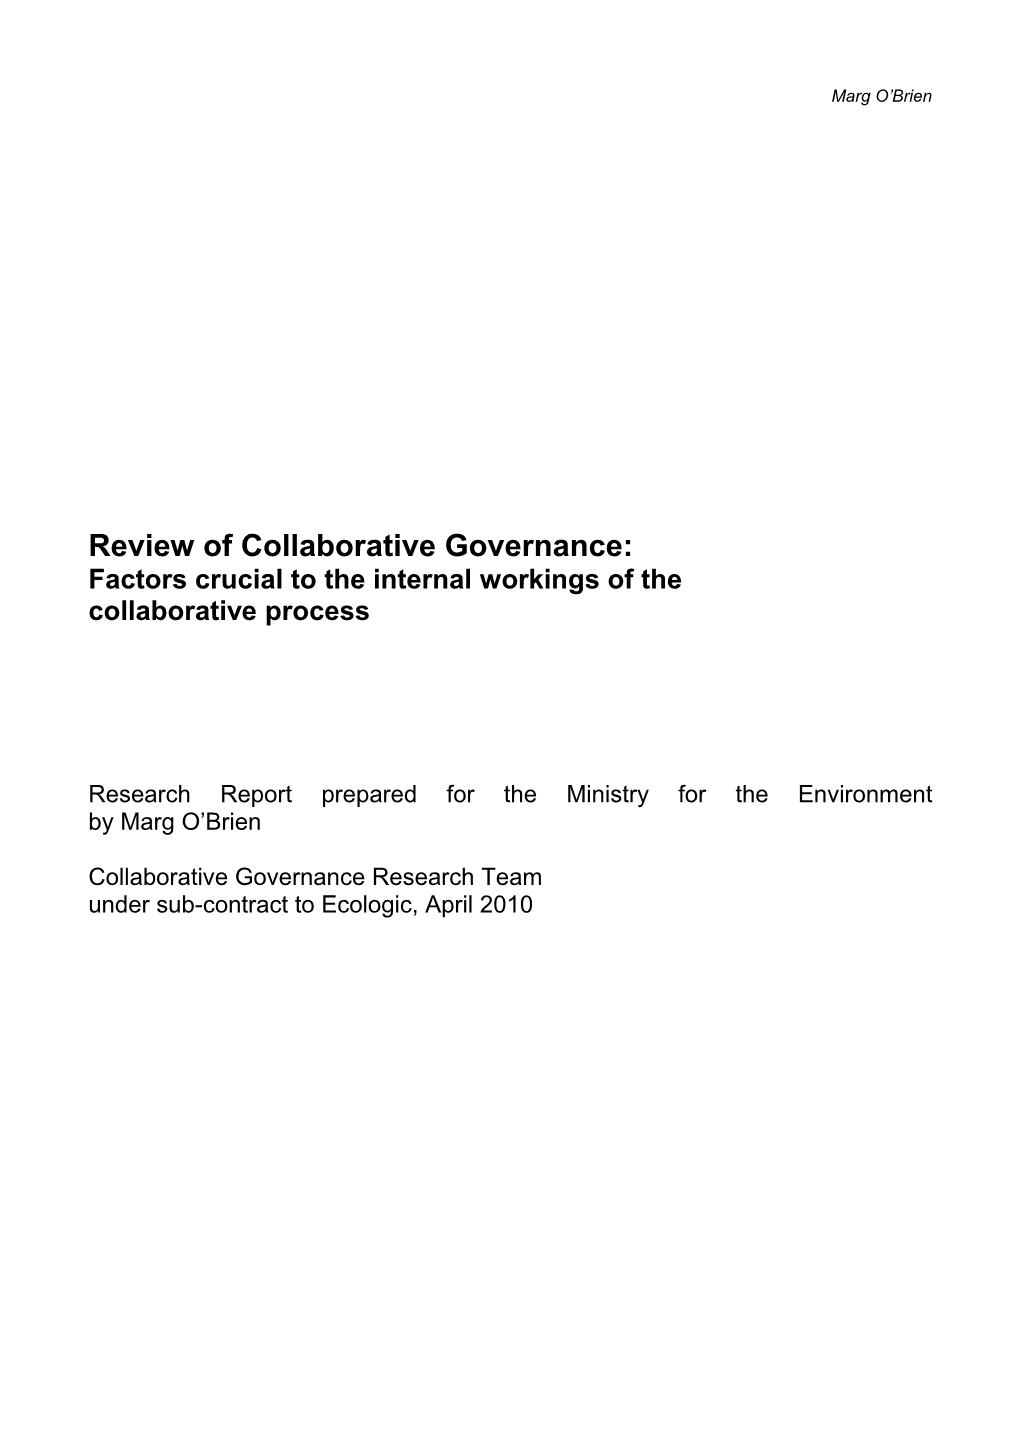 Review of Collaborative Governance Literature Review